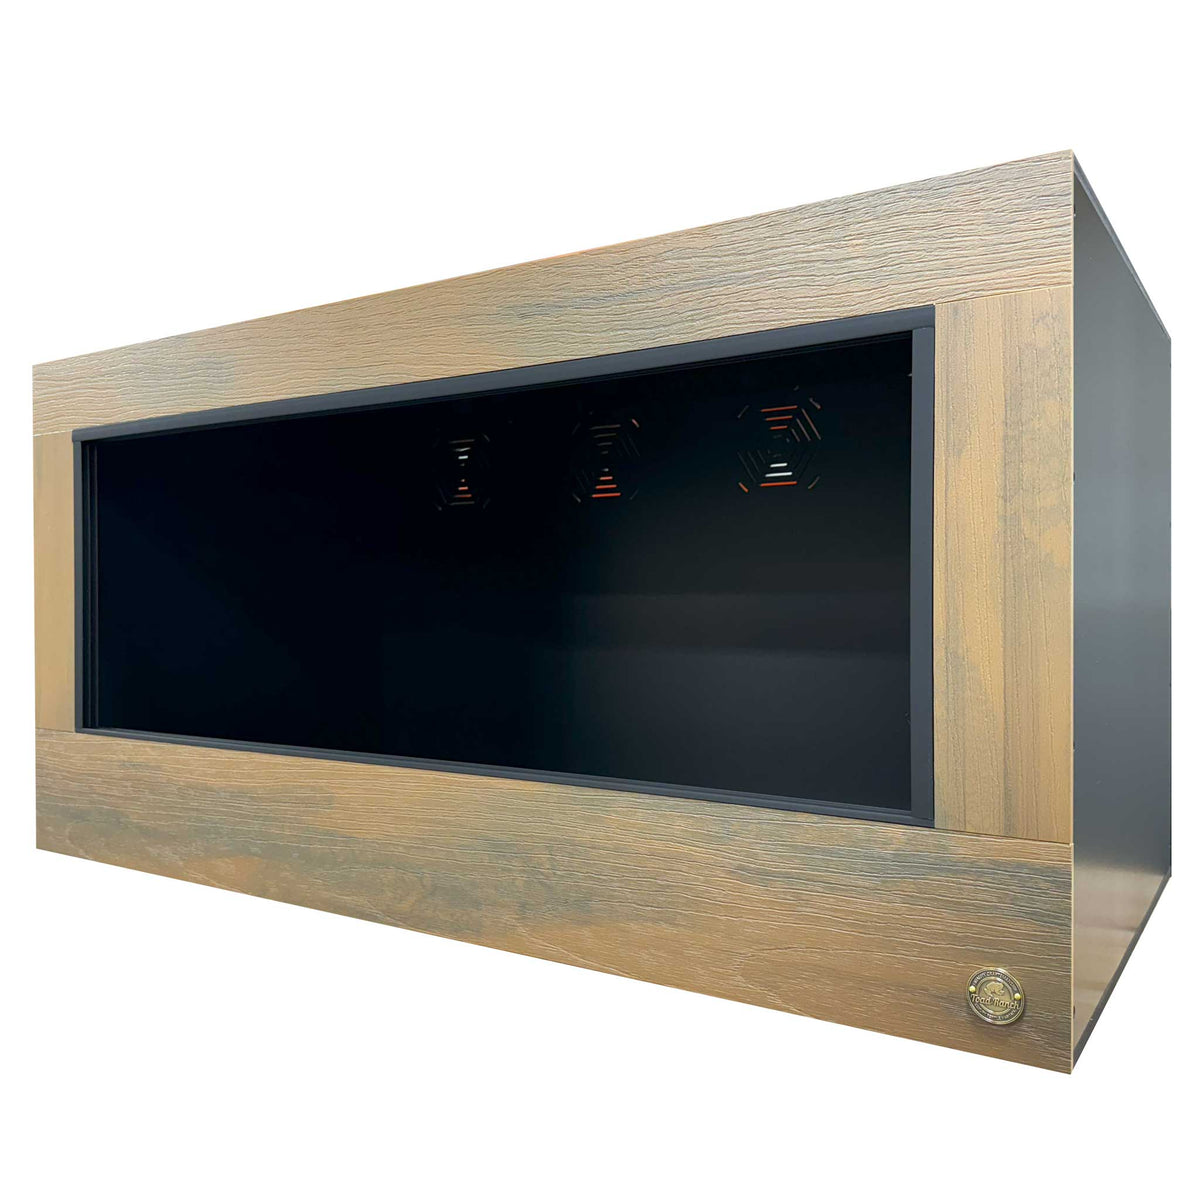 Quality American Reptile Enclosure. This 4x2x2 has 3/4" thick Teak HDPE front frame paired with black PVC body panels. The 6-inch lower front frame allows for the perfect amount of substrate for your pet reptile. 